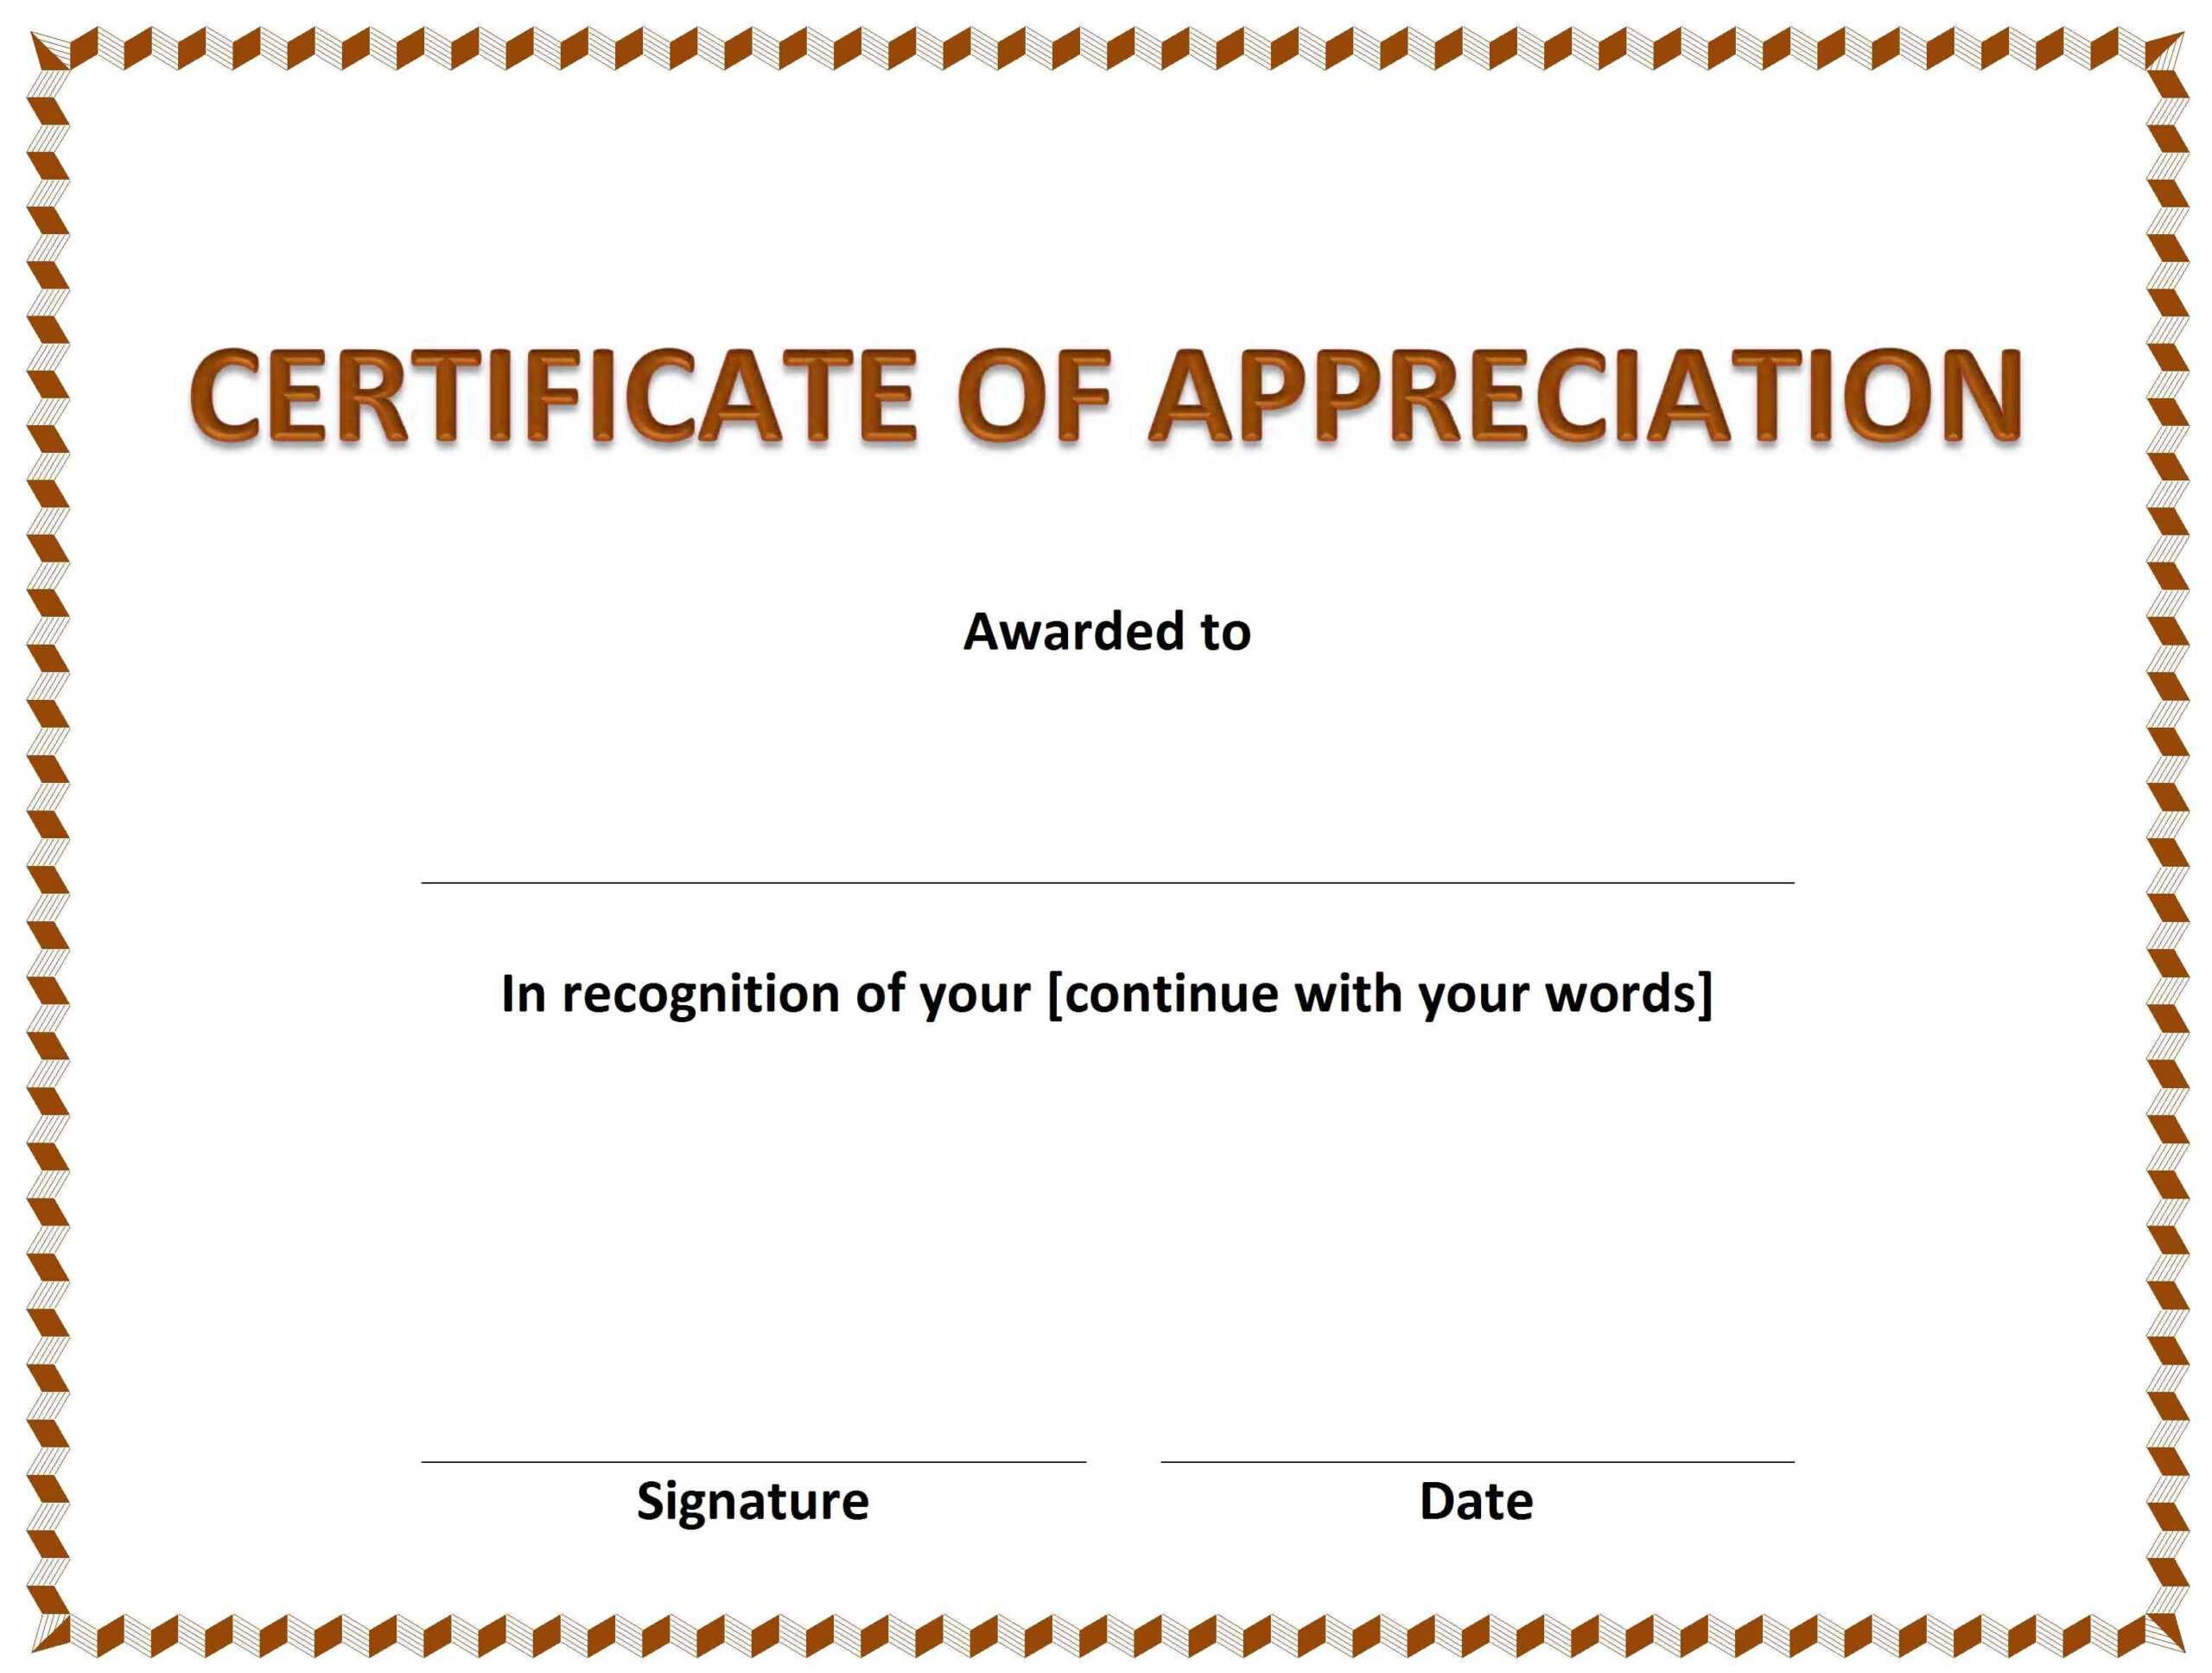 Certificate Of Appreciation » Officetemplates Inside Template For Certificate Of Appreciation In Microsoft Word